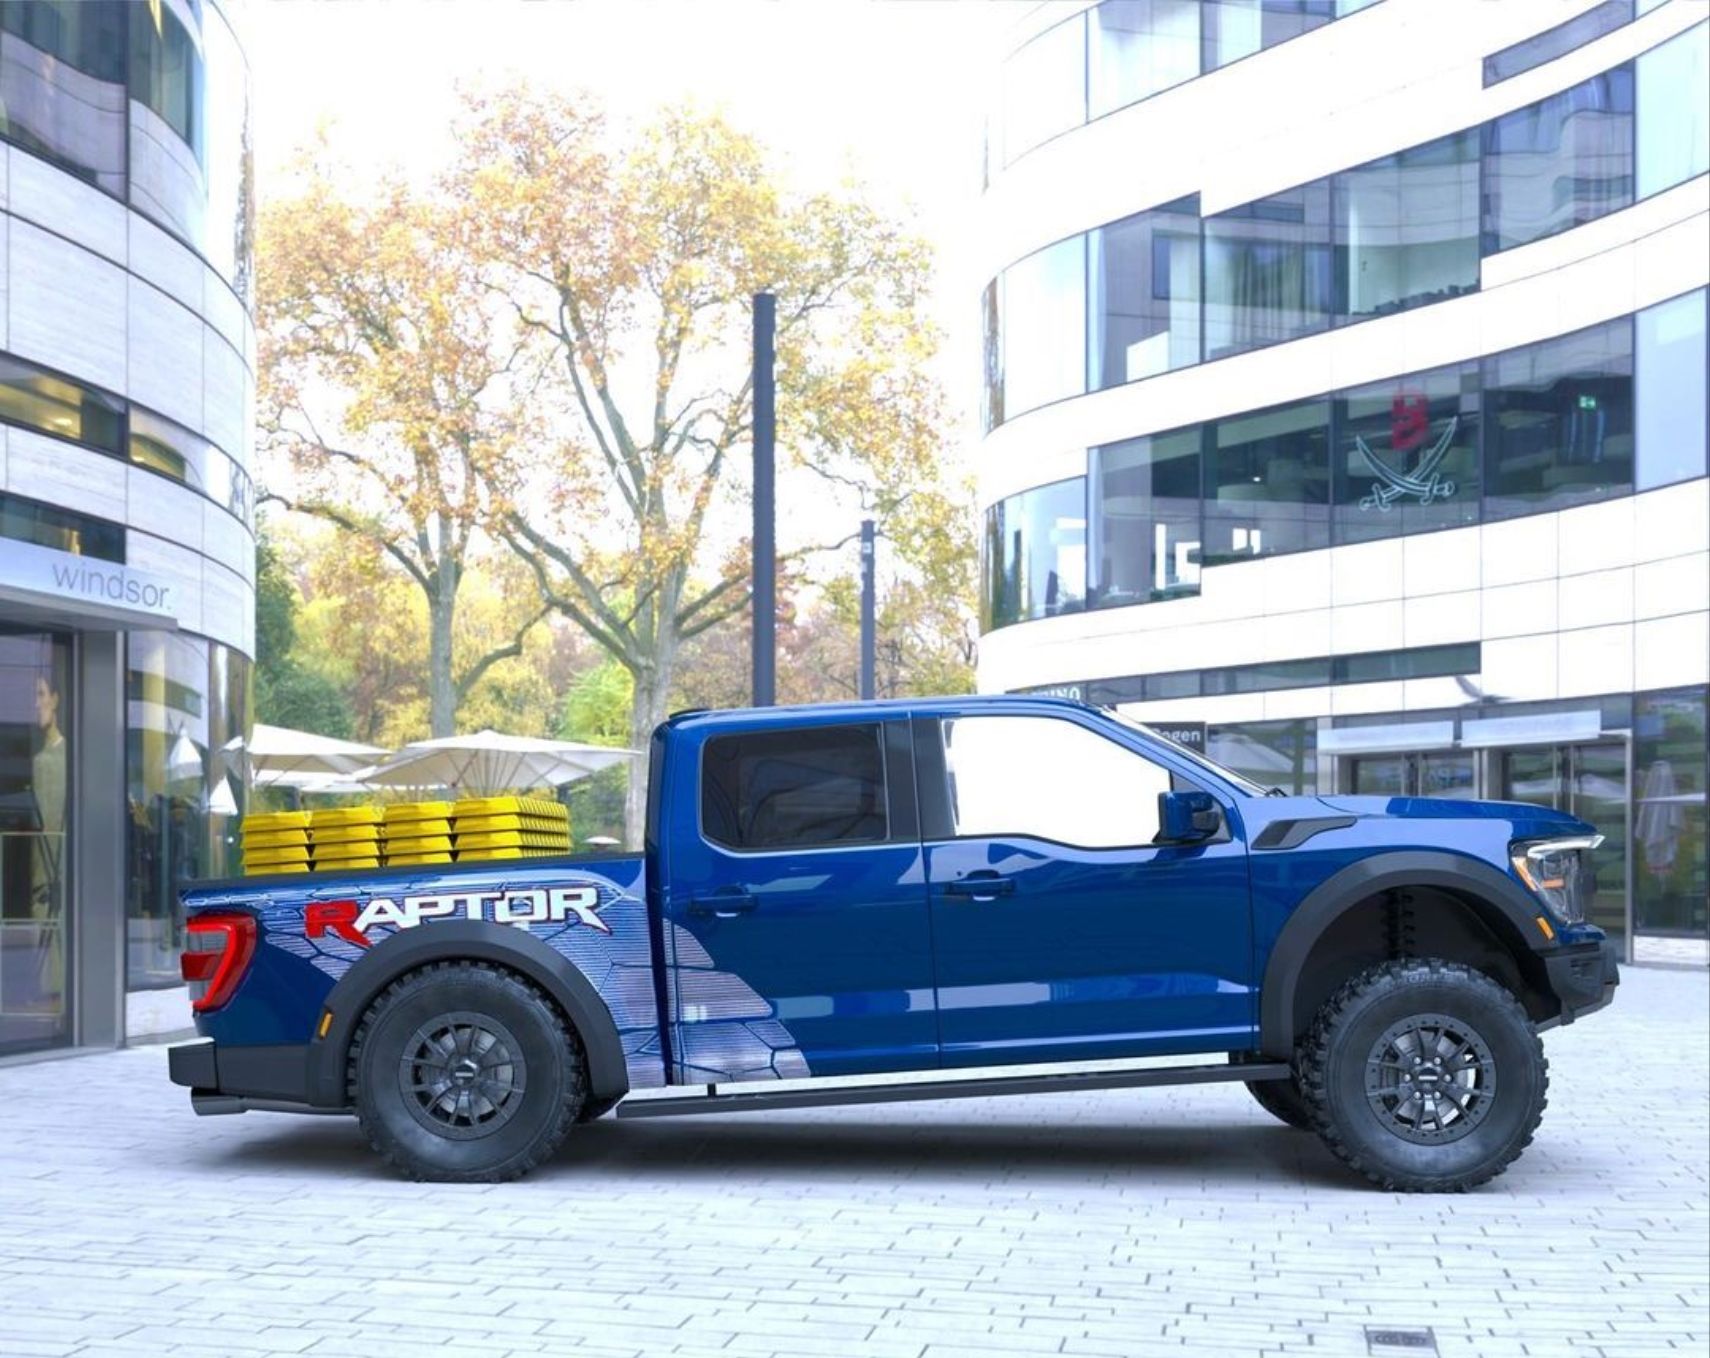 The New Ford V8-Powered F-150 Raptor R Just Got Better